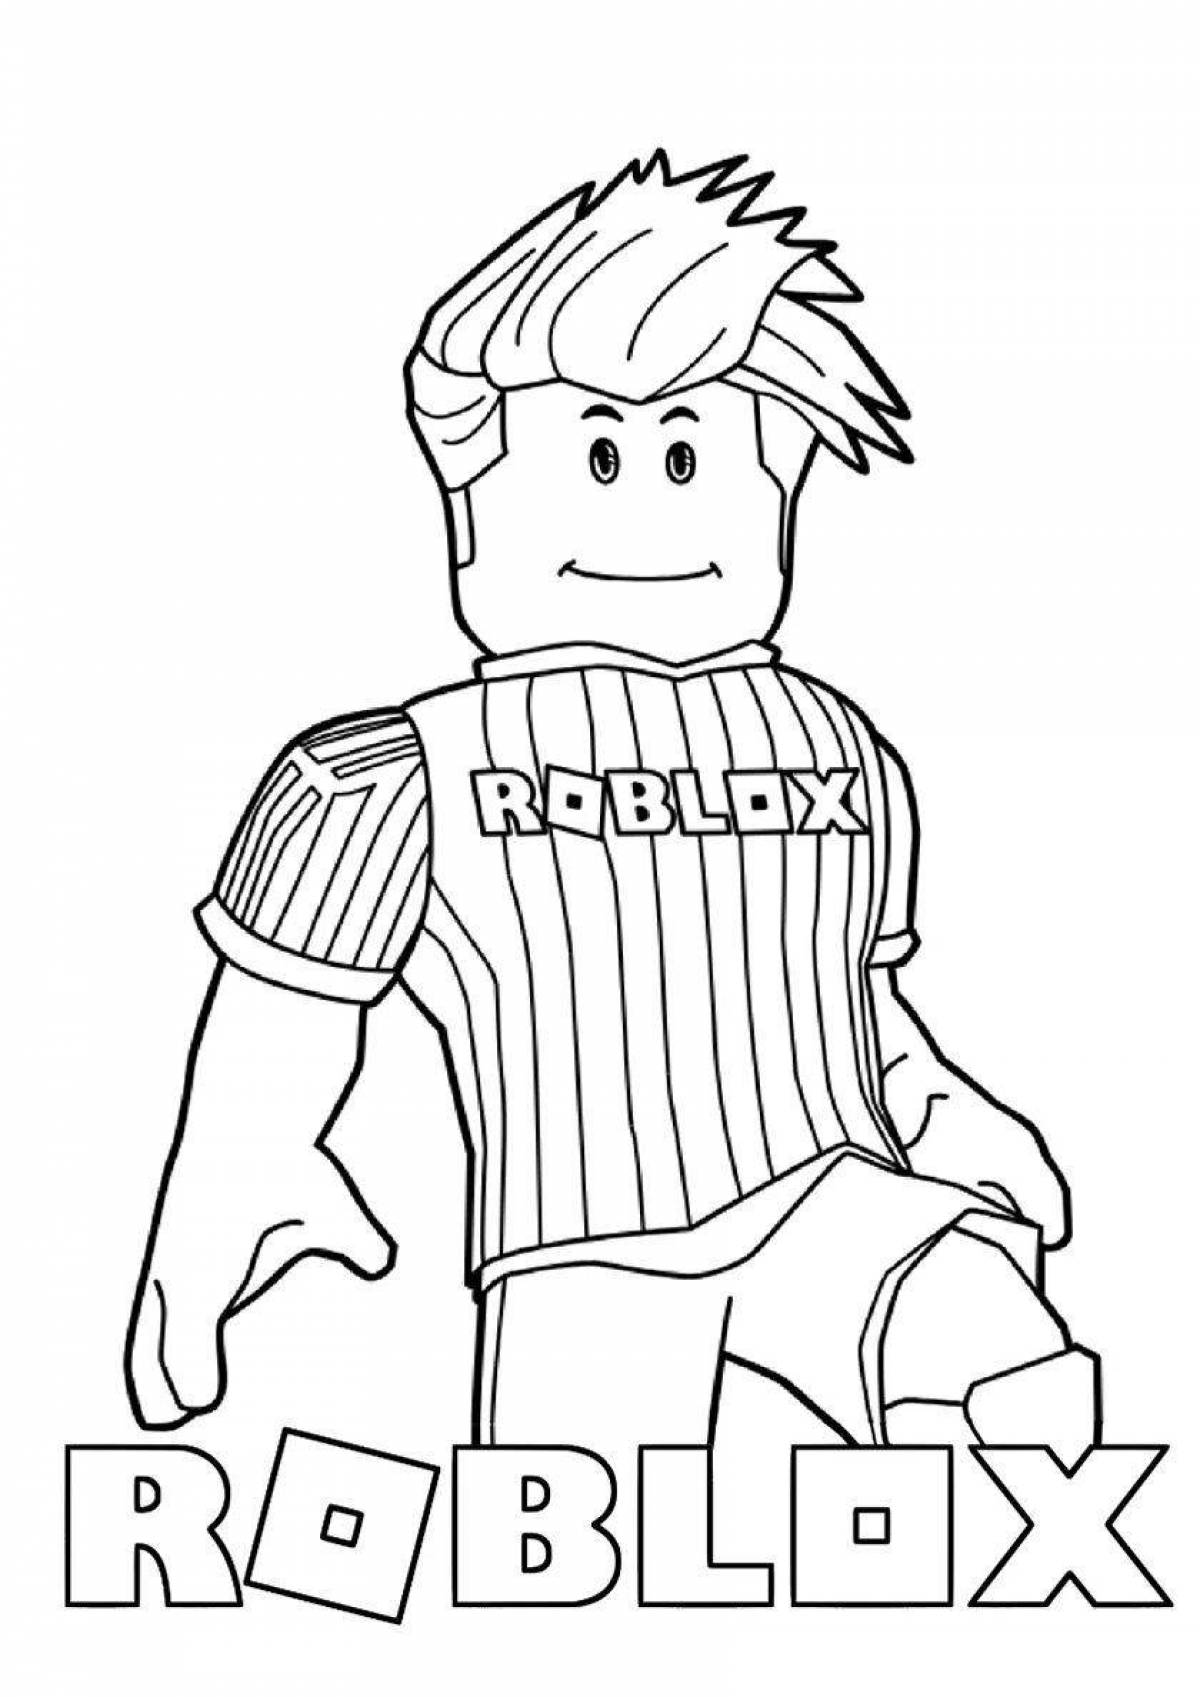 Charming robloch coloring book